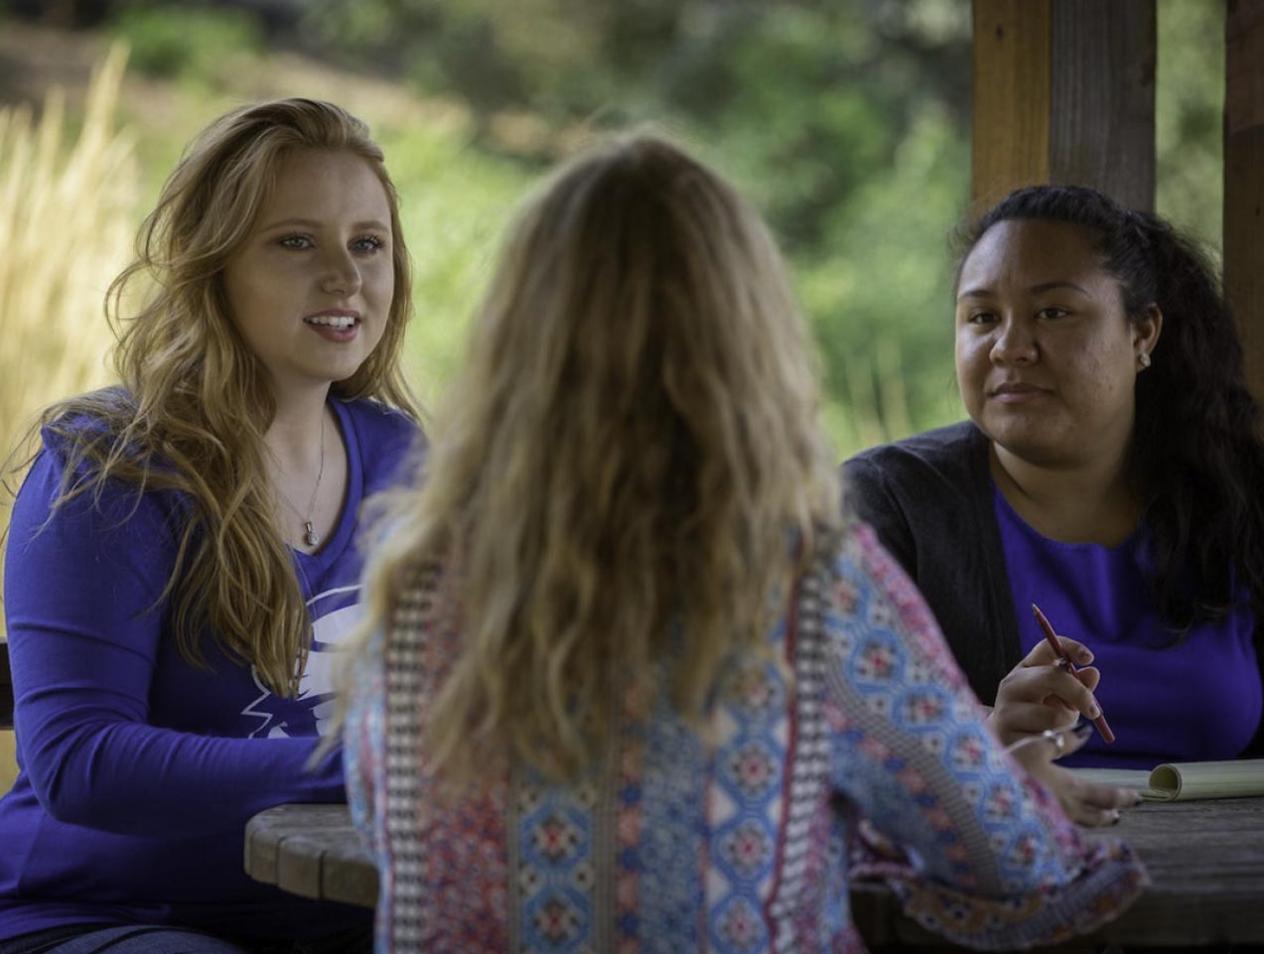 Three students talking at outside table